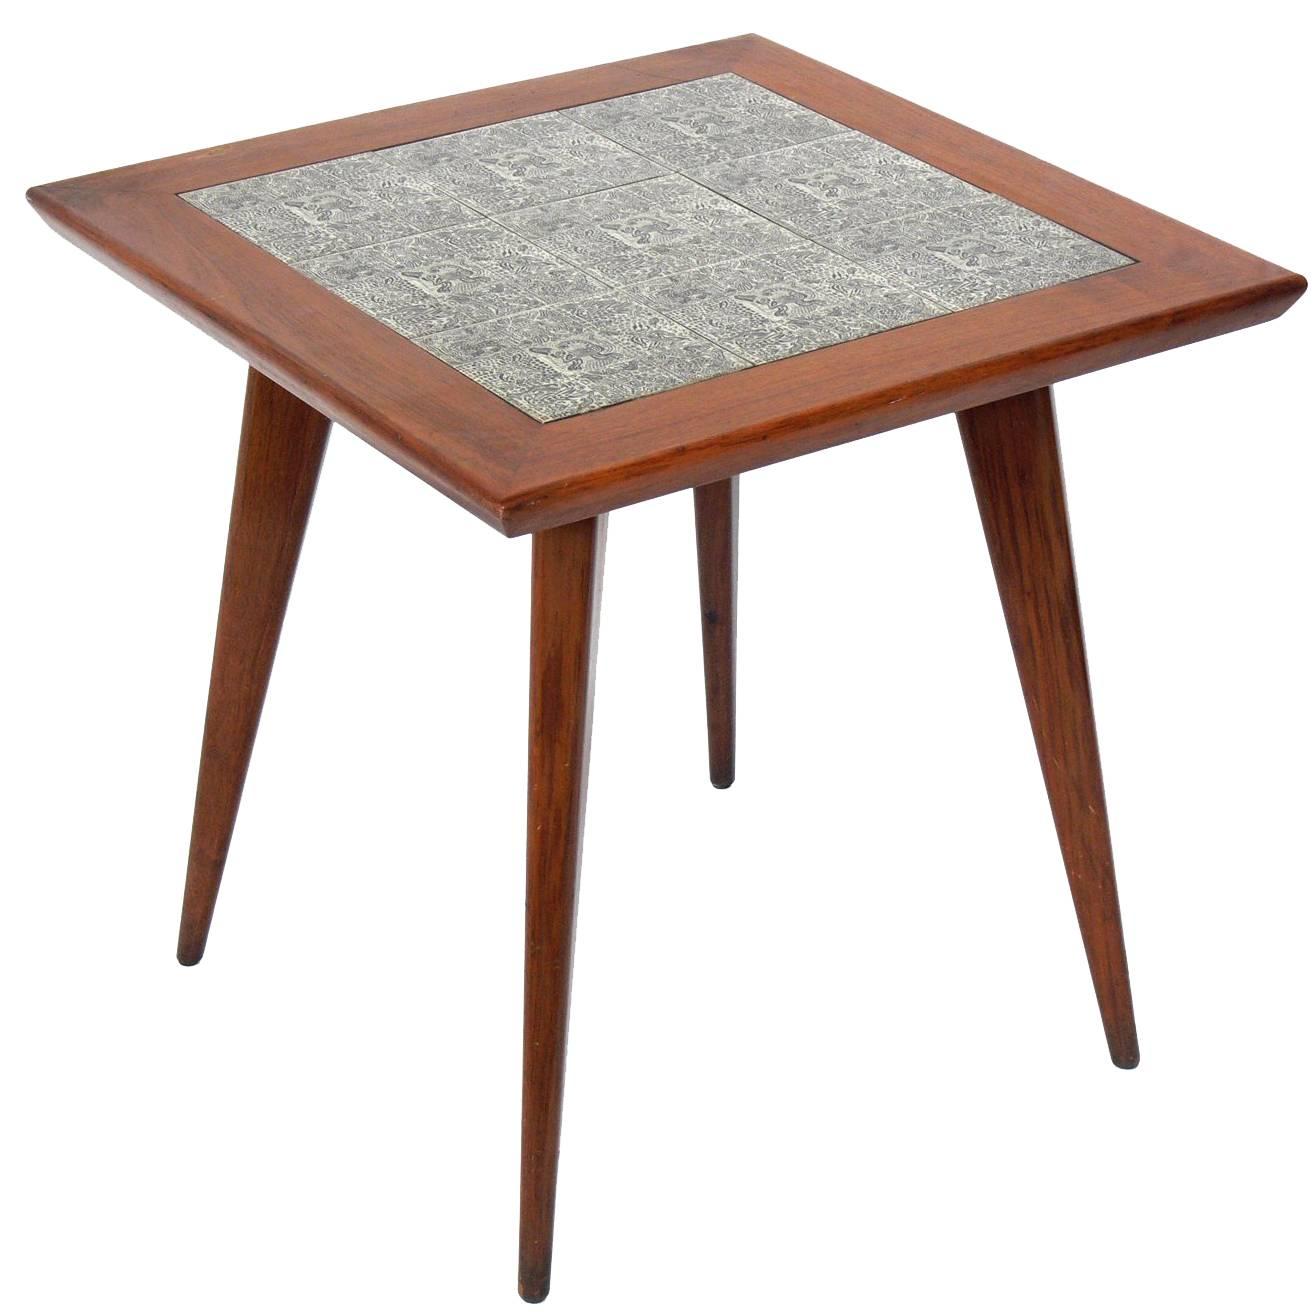 Brazilian Mid-Century End Table with Inset Tiles